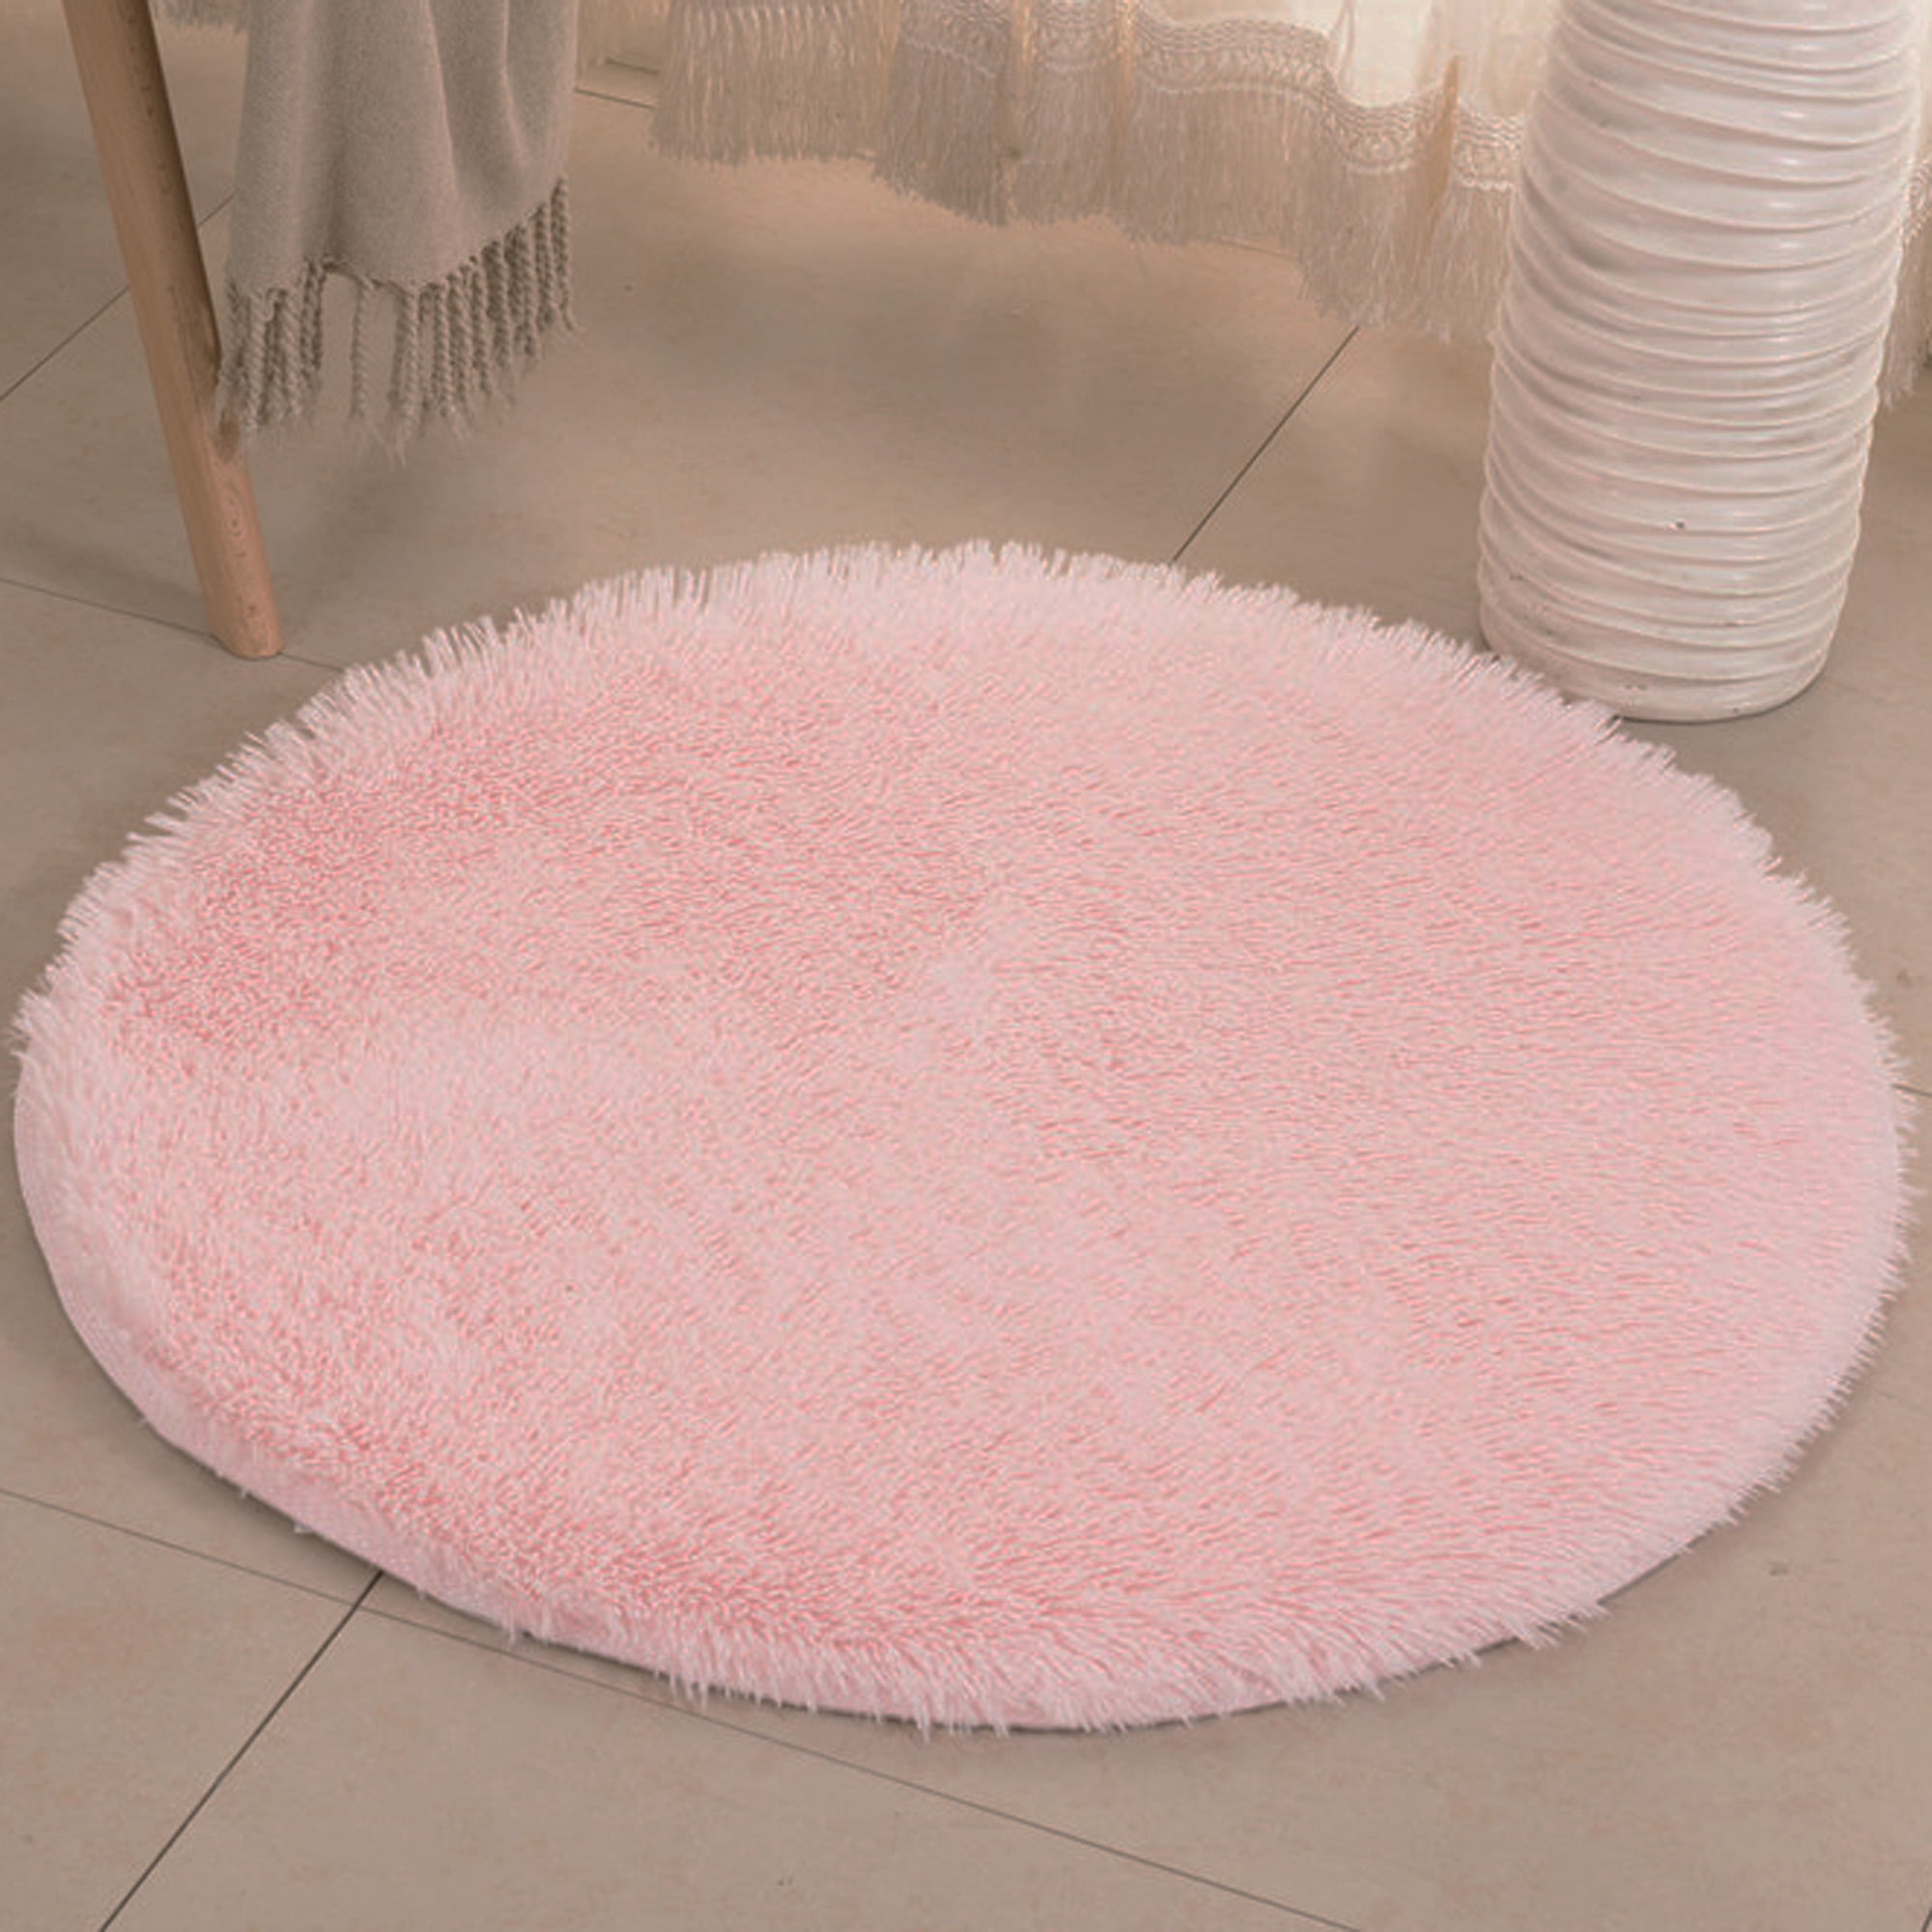 Dodoing Super Soft Round Area Rugs For, Light Blue And White Rug For Nursery